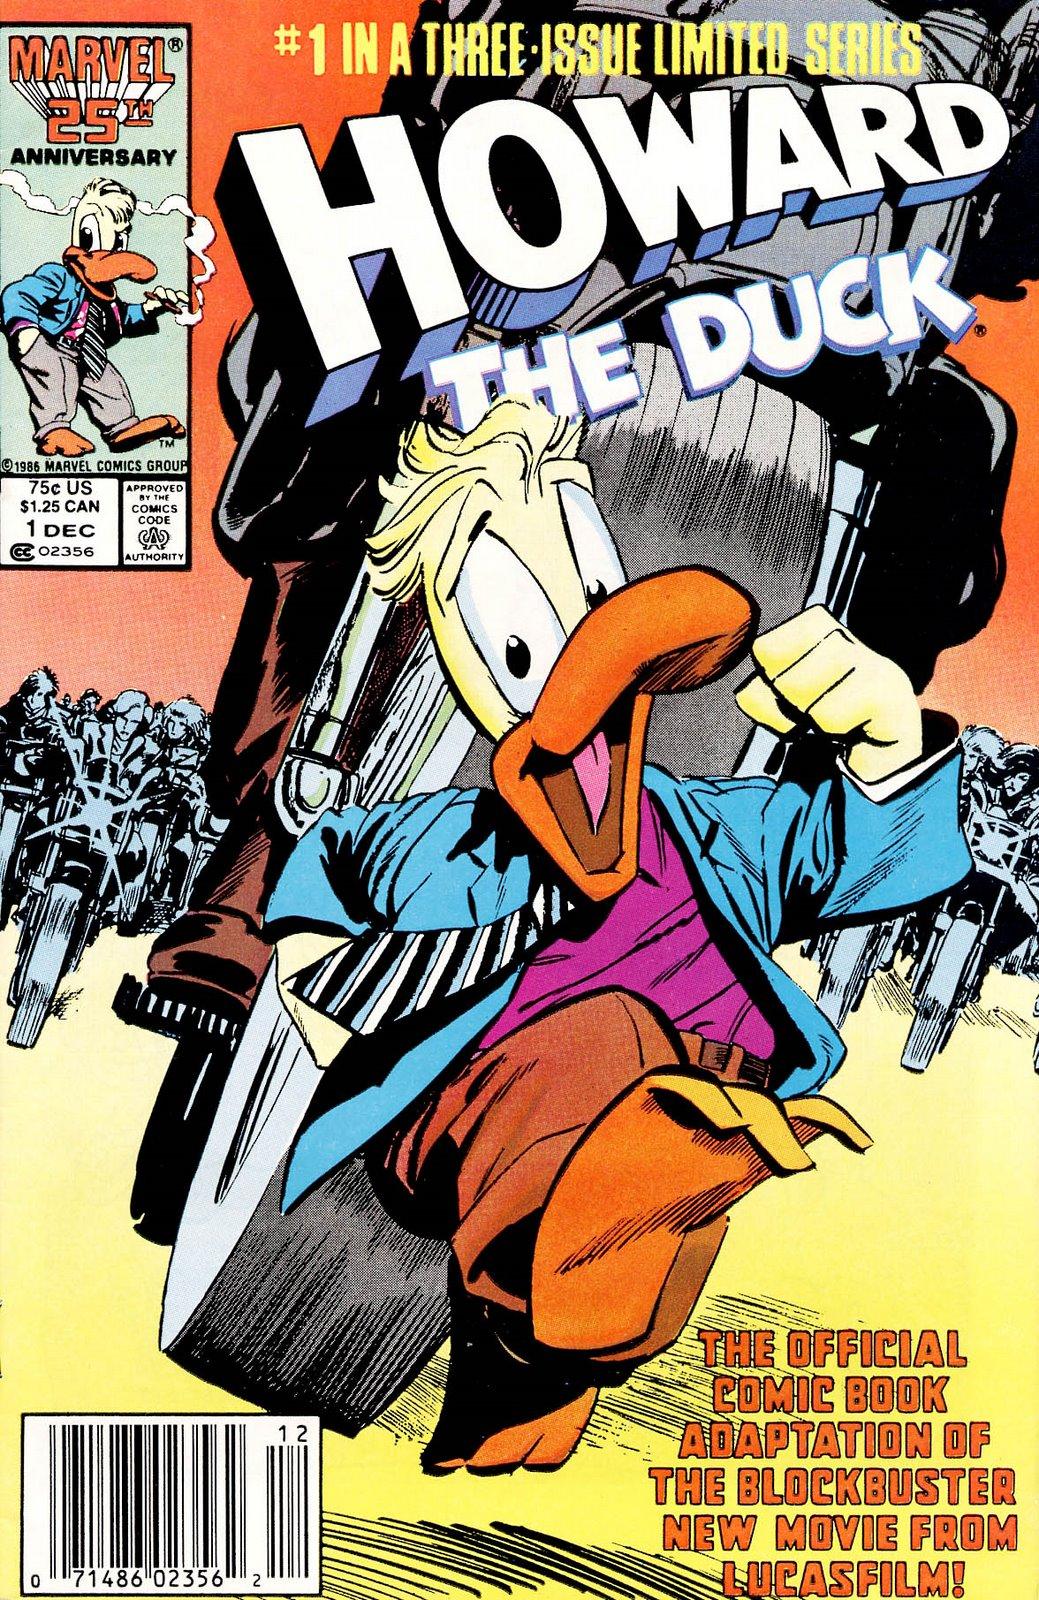 Howard the Duck: The Movie Vol. 1 #1